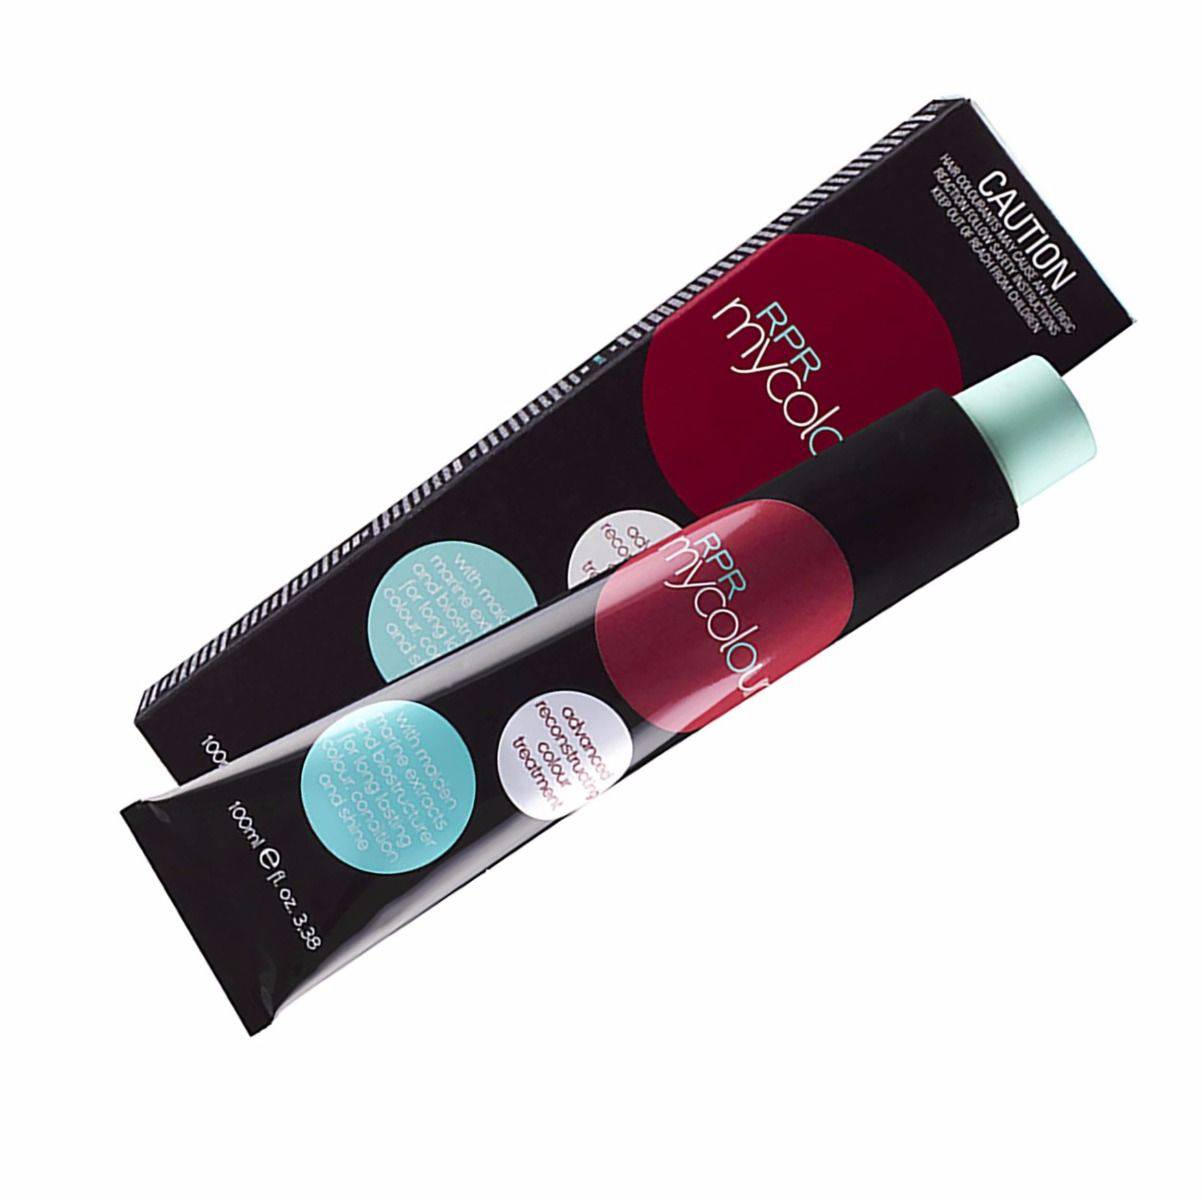 RPR My Colour 7.44 Level 7 Intense Copper 100g tube Mix 1:1.5 - On Line Hair Depot